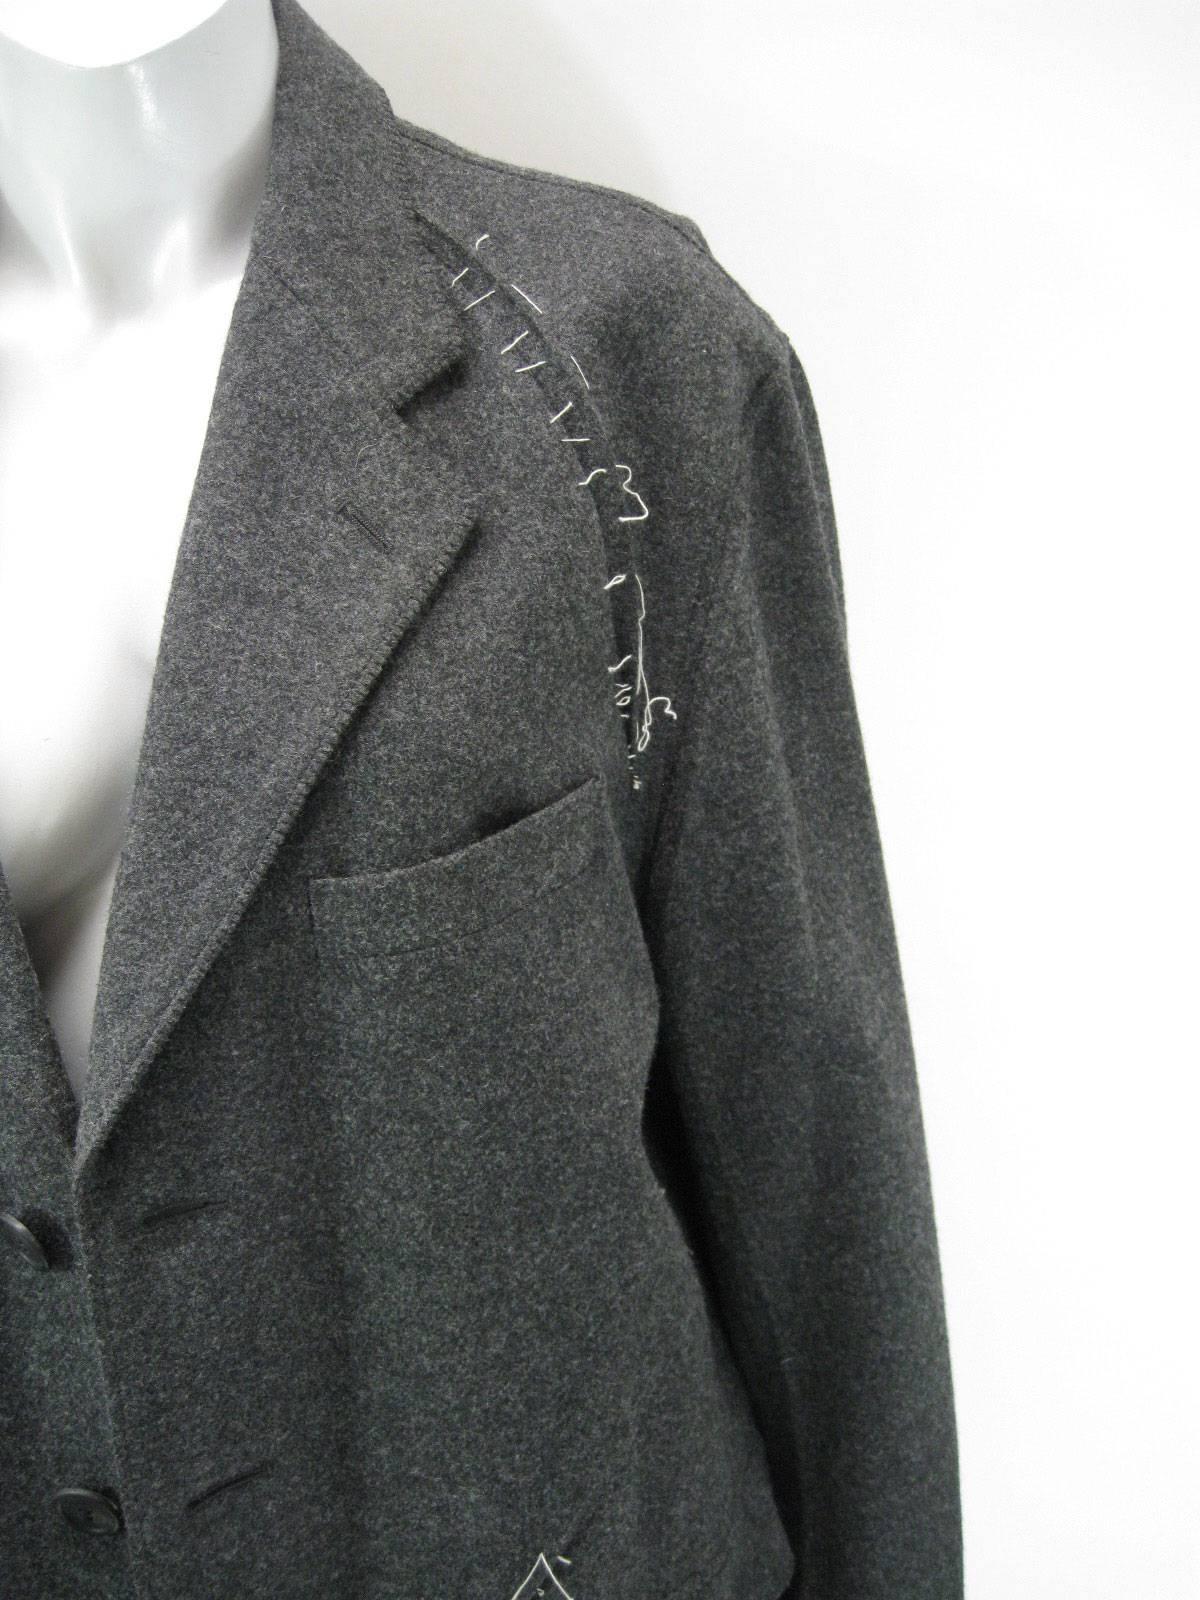 Women's or Men's Issey Miyake Grey Wool Coat Trench w White Stitching Pleats For Sale